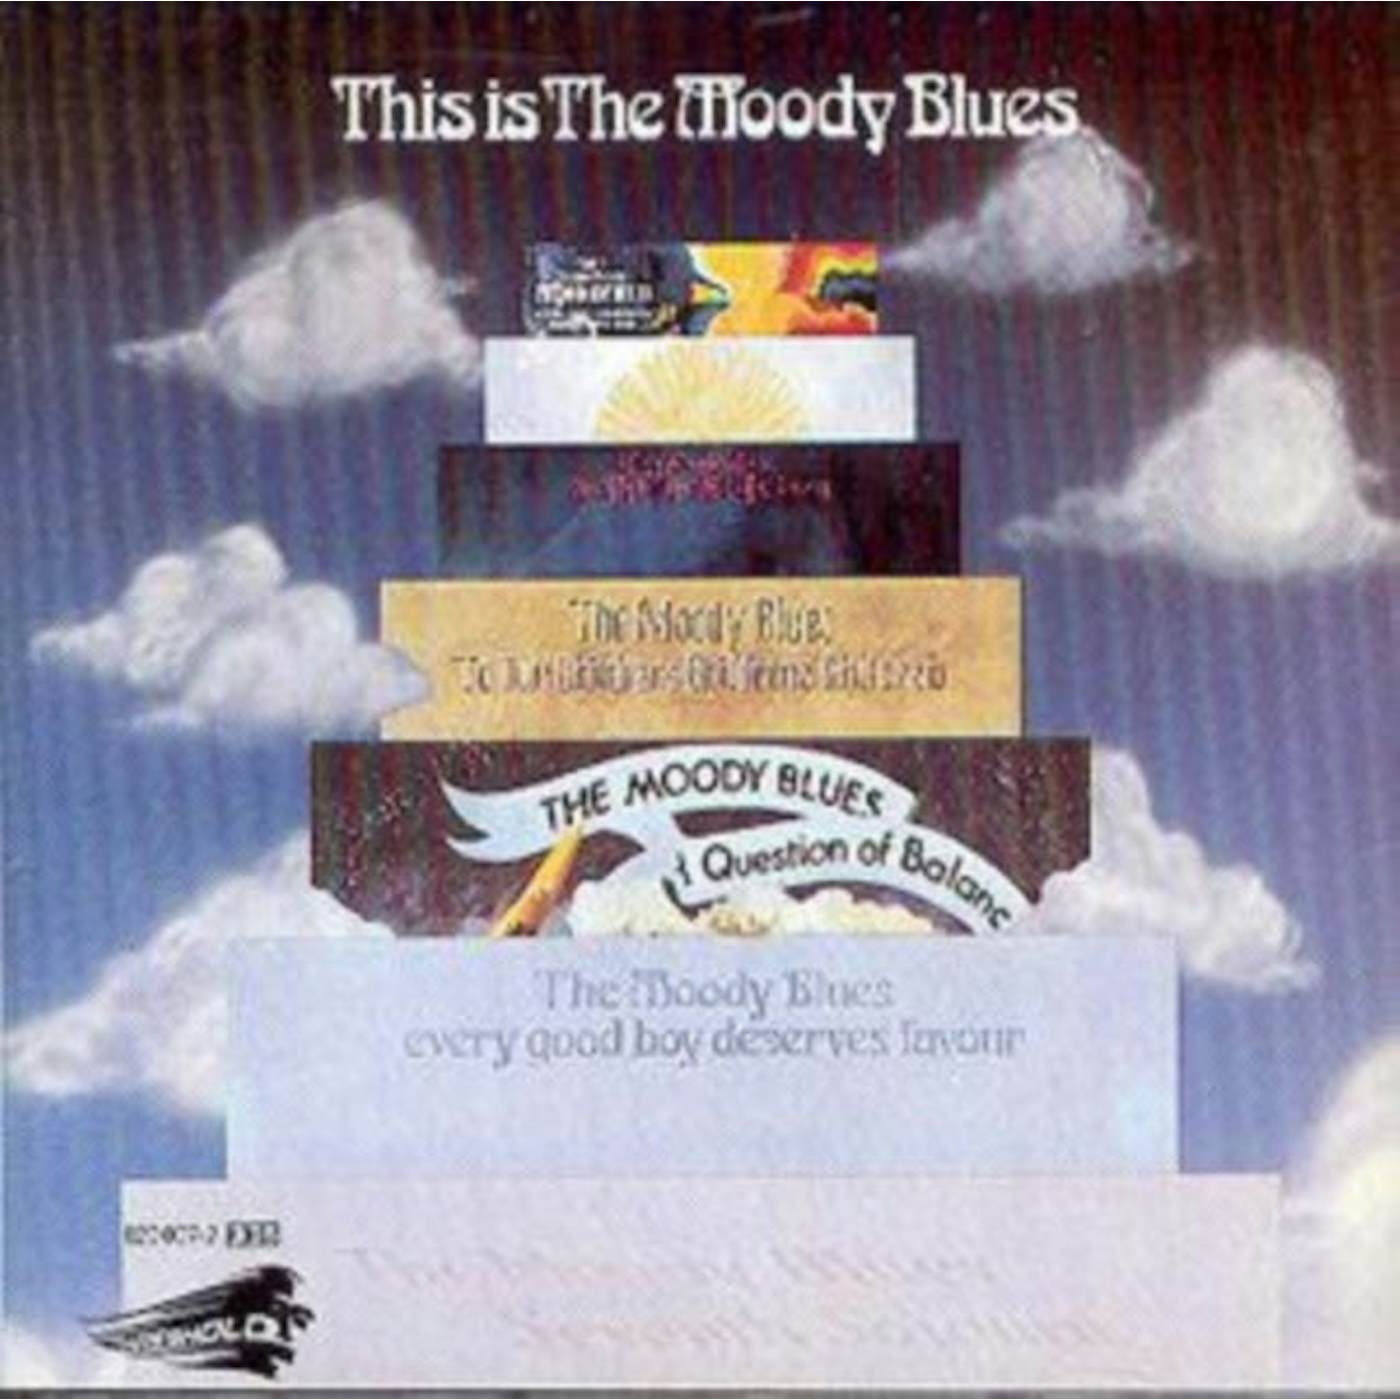 Moody Blues CD - This Is The Moody Blues